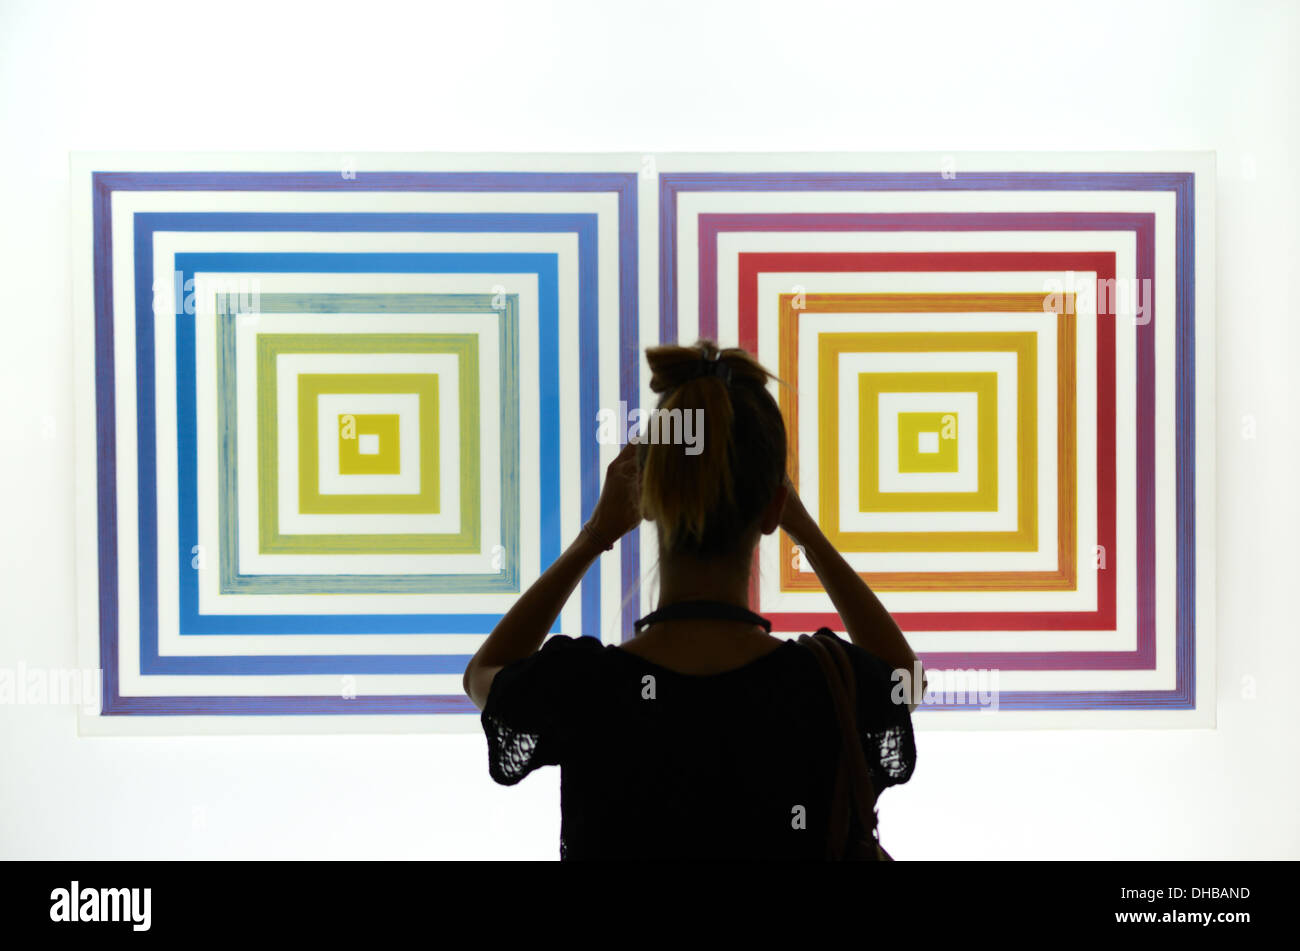 Visitor Taking Photo of Abstract Painting by François Morellet at the Centre Pompidou Mobile Art Exhibition France Stock Photo